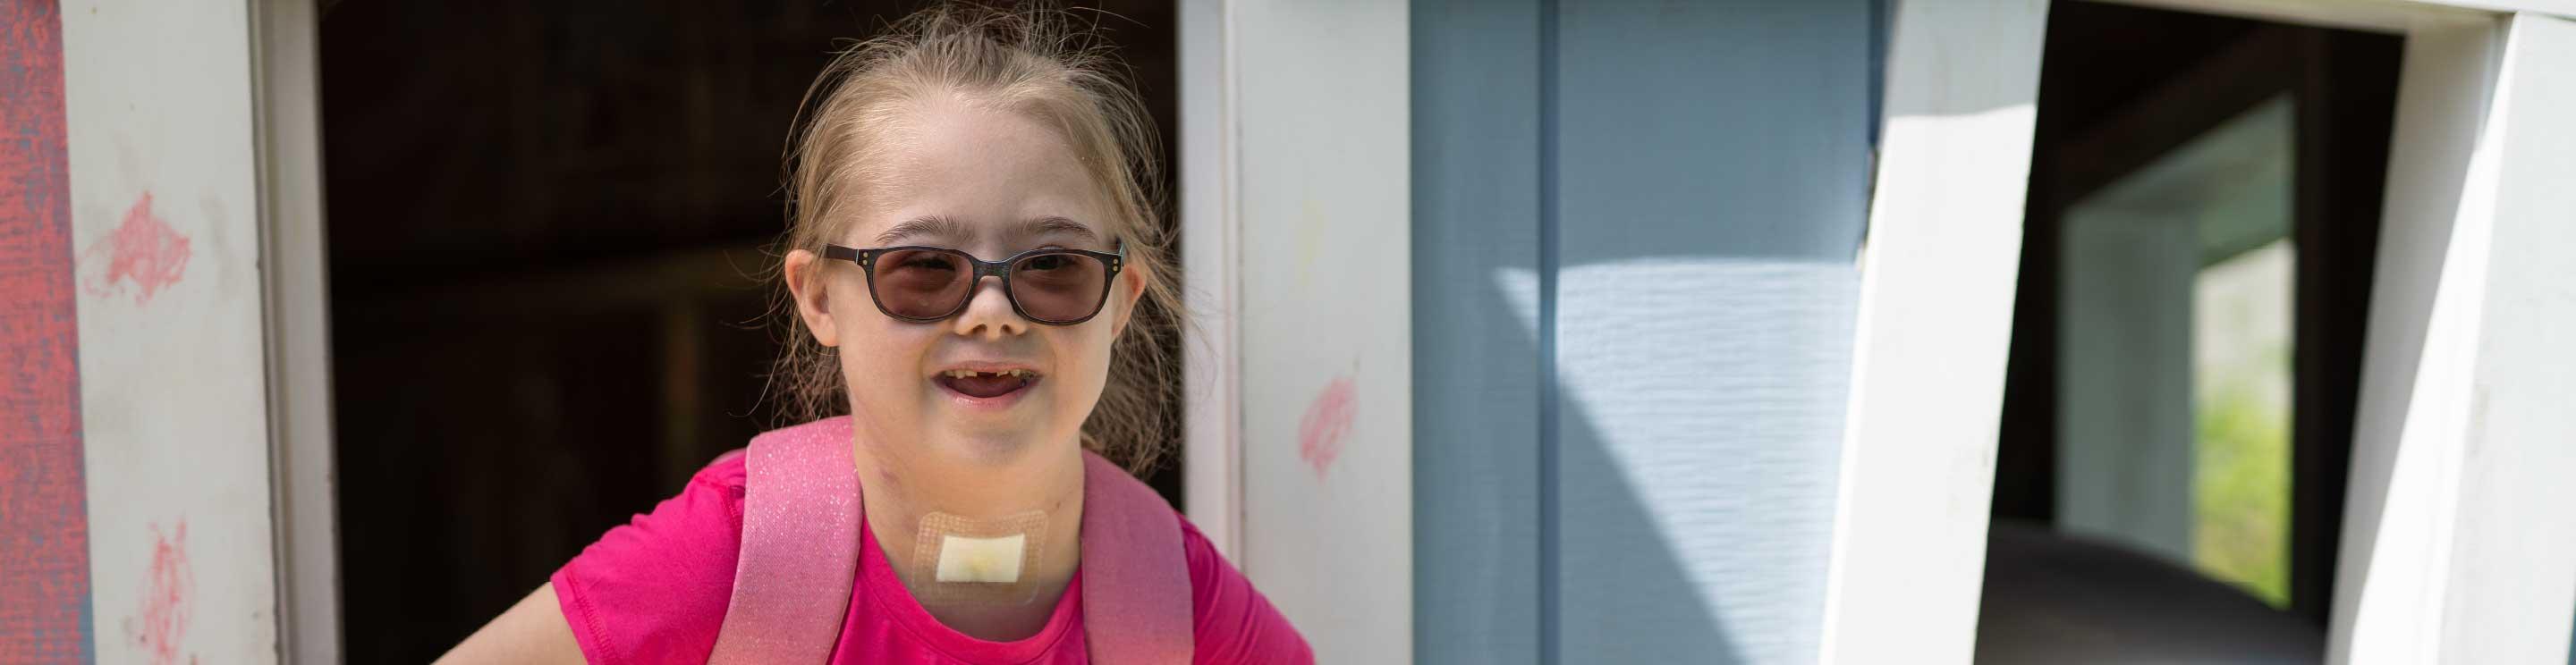 A young girl wearing glasses.